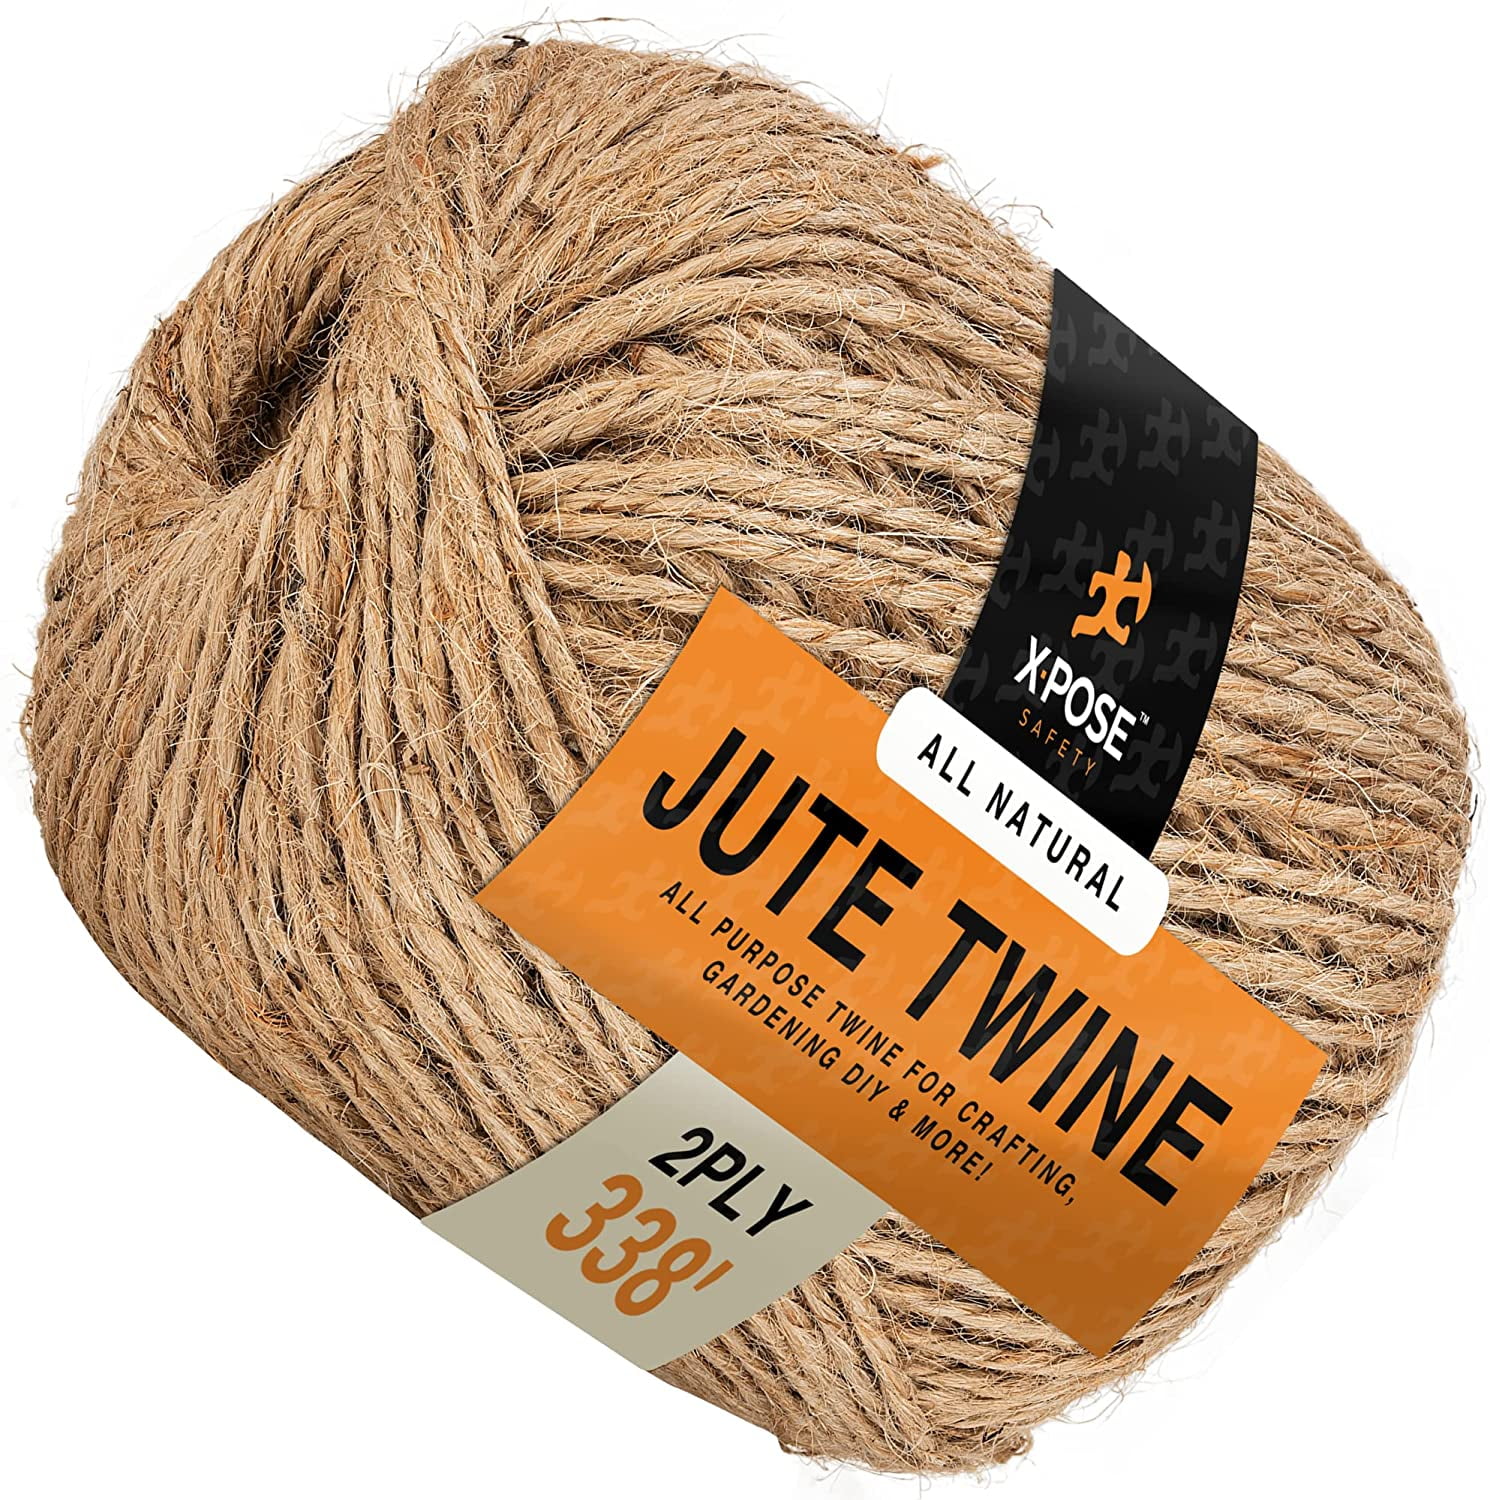 Ashland Natural CRAFT TWINE 120 Feet Crafts Gift Wrap Unbleached Jute